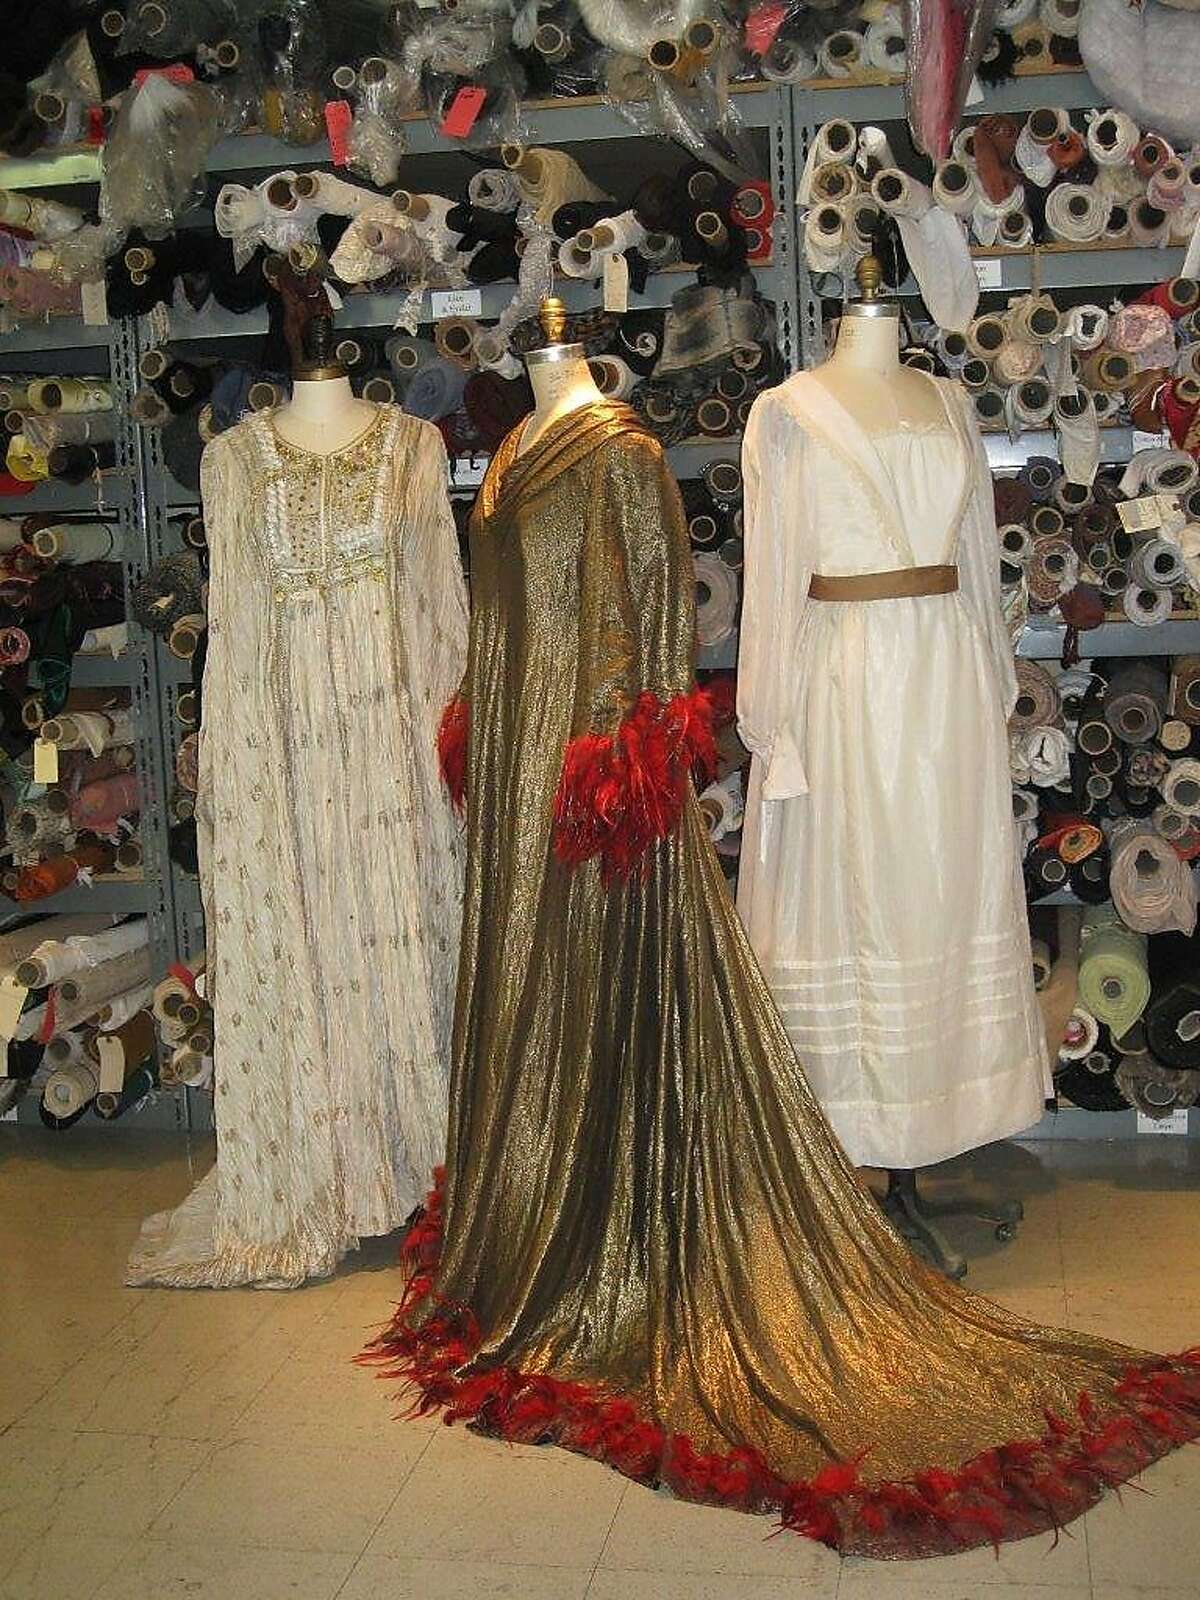 The San Francisco Opera will hold a costume shop sale of costumes and fabric on March 22 and 23, 2014. Prices will range from $1 to $750. The costume shop is at 800 Indiana St., San Francisco.